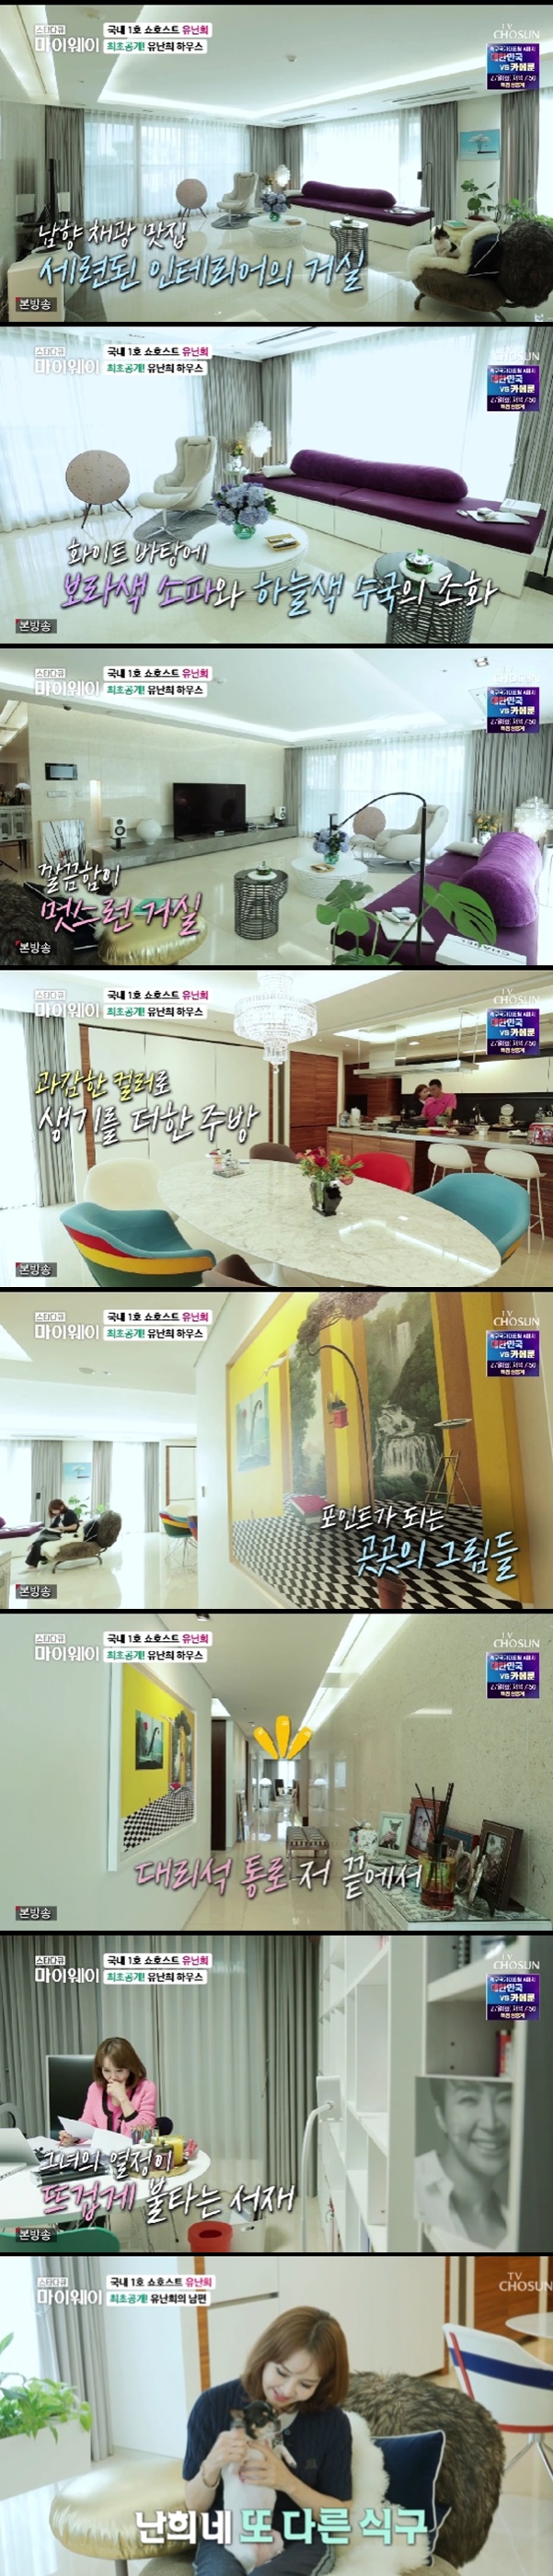 star documentary myway yu nan-hee has revealed a home with pediatrician Husband.In the TV CHOSUN star documentary myway broadcasted on the 25th, Korea s No. 1 show host Yu nan-hee appeared and released the family and house for the first time from the history of announcer 22.Yu nan-hee became the first show host in Korea in 1995 when he was the first home shopping broadcasting company in Korea.In less than a year after opening, it achieved sales of 100 million won per hour. In 2012, it exceeded 100 million sales per minute for the first time in Home Shopping, and it was the first to record 100 million Salary records.After the Freelancers declaration, he continued to open the way for the first time and won the titles of first and best.Yu nan-hee said: Its 28 years old; weve been the first home shopping broadcast in Korea and weve had 100 million sales per hour.For the first time, it became the first Freelancers to broadcast and for the first time, it sold 100 million won per minute. Yu nan-hee met singer Noh Sa-yeon, comedian Lee Seong-mi.While talking about love and marriage, Yu nan-hee said, I do not want to marry and I want to love.When Noh Sa-yeon says, You should stay away from Husband too, yu nan-hee says, Its a weekend couple but (Husband is drinking) Moy Yat comes up.The house is almost a hotel, an inn. Yu nan-hee said, I married and it was not hard, actually. I lived in my in-laws. My in-laws were awkward, but it was so hard to live with my mother-in-law.It was from the time we raised our son that we understood her mother-in-law, who was so good at her that she said she was mama-bo in her own mouth.I did not understand it, but I lived for more than 20 years and gave birth and raised a son. I understood that my mother was very passionate about her child.On this day, Yu nan-hee unveiled a large house.Marble passage south-facing mining showed a living room with a sophisticated interior and a purple sofa.The Kitchen, which added vitality to bold colors, colorful chandelier lighting, a balance of cool marble and warm color chairs, paintings that are points, and a study filled with books were also noticeable.Yu nan-hee met and married resident Husband at the age of thirty, saying, Its Husband who has been living with me for 28 years, introducing pediatrician Kang In-nam.One went to the army and one had two sons studying (studying abroad), he said.Moy Yat listens to that story, I eat my life with impressions, the production team said.Yu nan-hee tapped Husband, who was camera conscious, saying to distance himself as usual; I dont talk much; Husband has a lot of words, he said.Im always saying its loud to me, said Husband of yu nan-hee.Husband said, I prepare ten times what I see, I cant care about anything else, life itself is a show host, would I want to live like that?(Husband) lives as an only child on her four sisters and has never done housework before; if she is so tired, she has to rub bibimbap and eat fish.I didnt even touch the housework. I went to Canada in junior high for about a year and a half, but it was completely renovated.Ive been cooking since then and now Im good, he said.Husband made kimbap saying that yu nan-hee likes it.Later, she ate out at an eel house with her 90-year-old mother-in-law; Yu nan-hee said, 10 years is so correct that she looks young. The mother-in-law said, My son and daughter-in-law are all filial.My son is strong and my daughter-in-law is lovely. Photo: TV CHOSUN broadcast screen